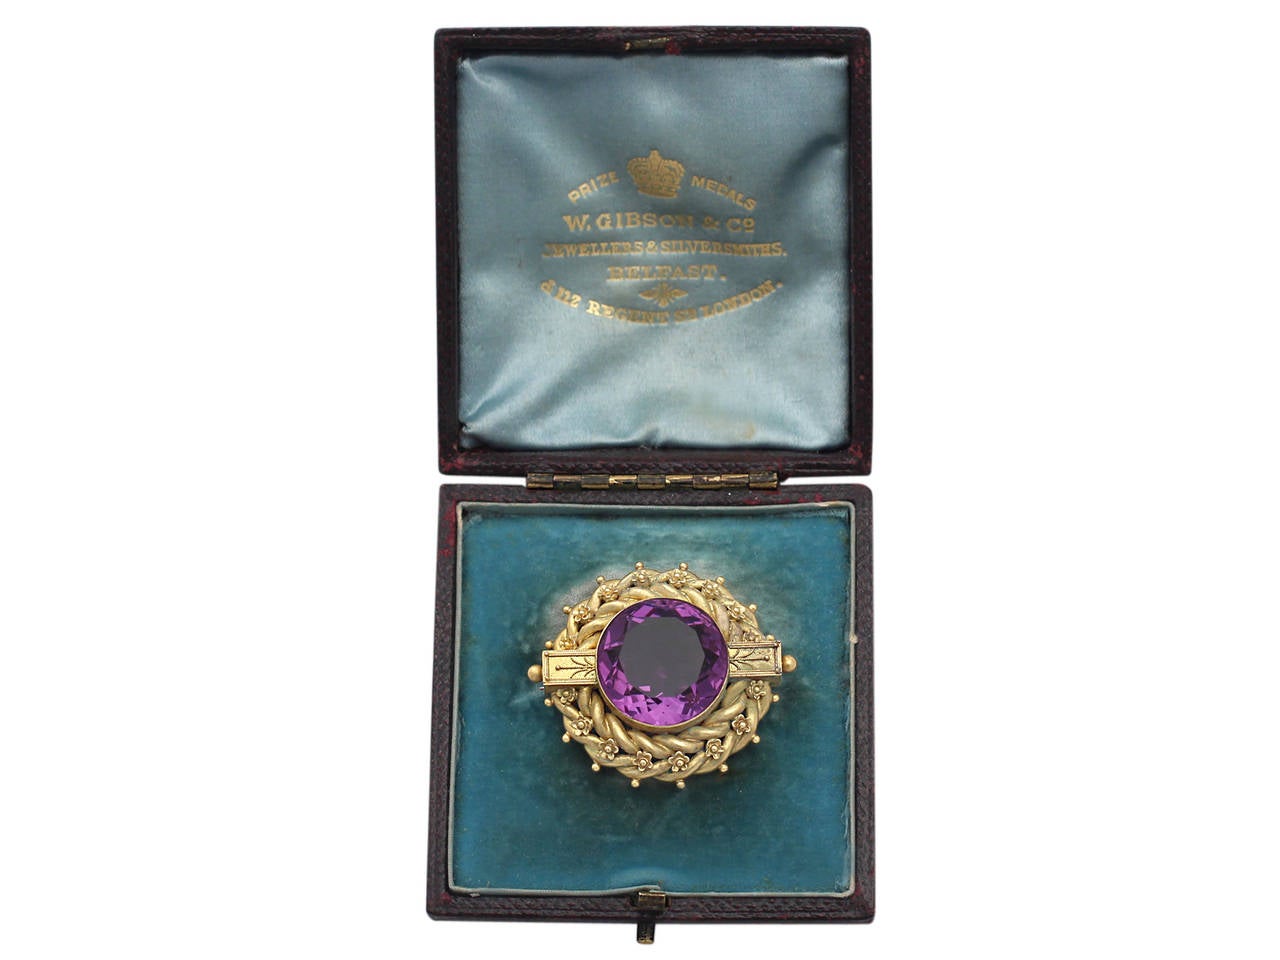 18.91Ct Amethyst and 20k Yellow Gold Brooch - Antique Victorian 4